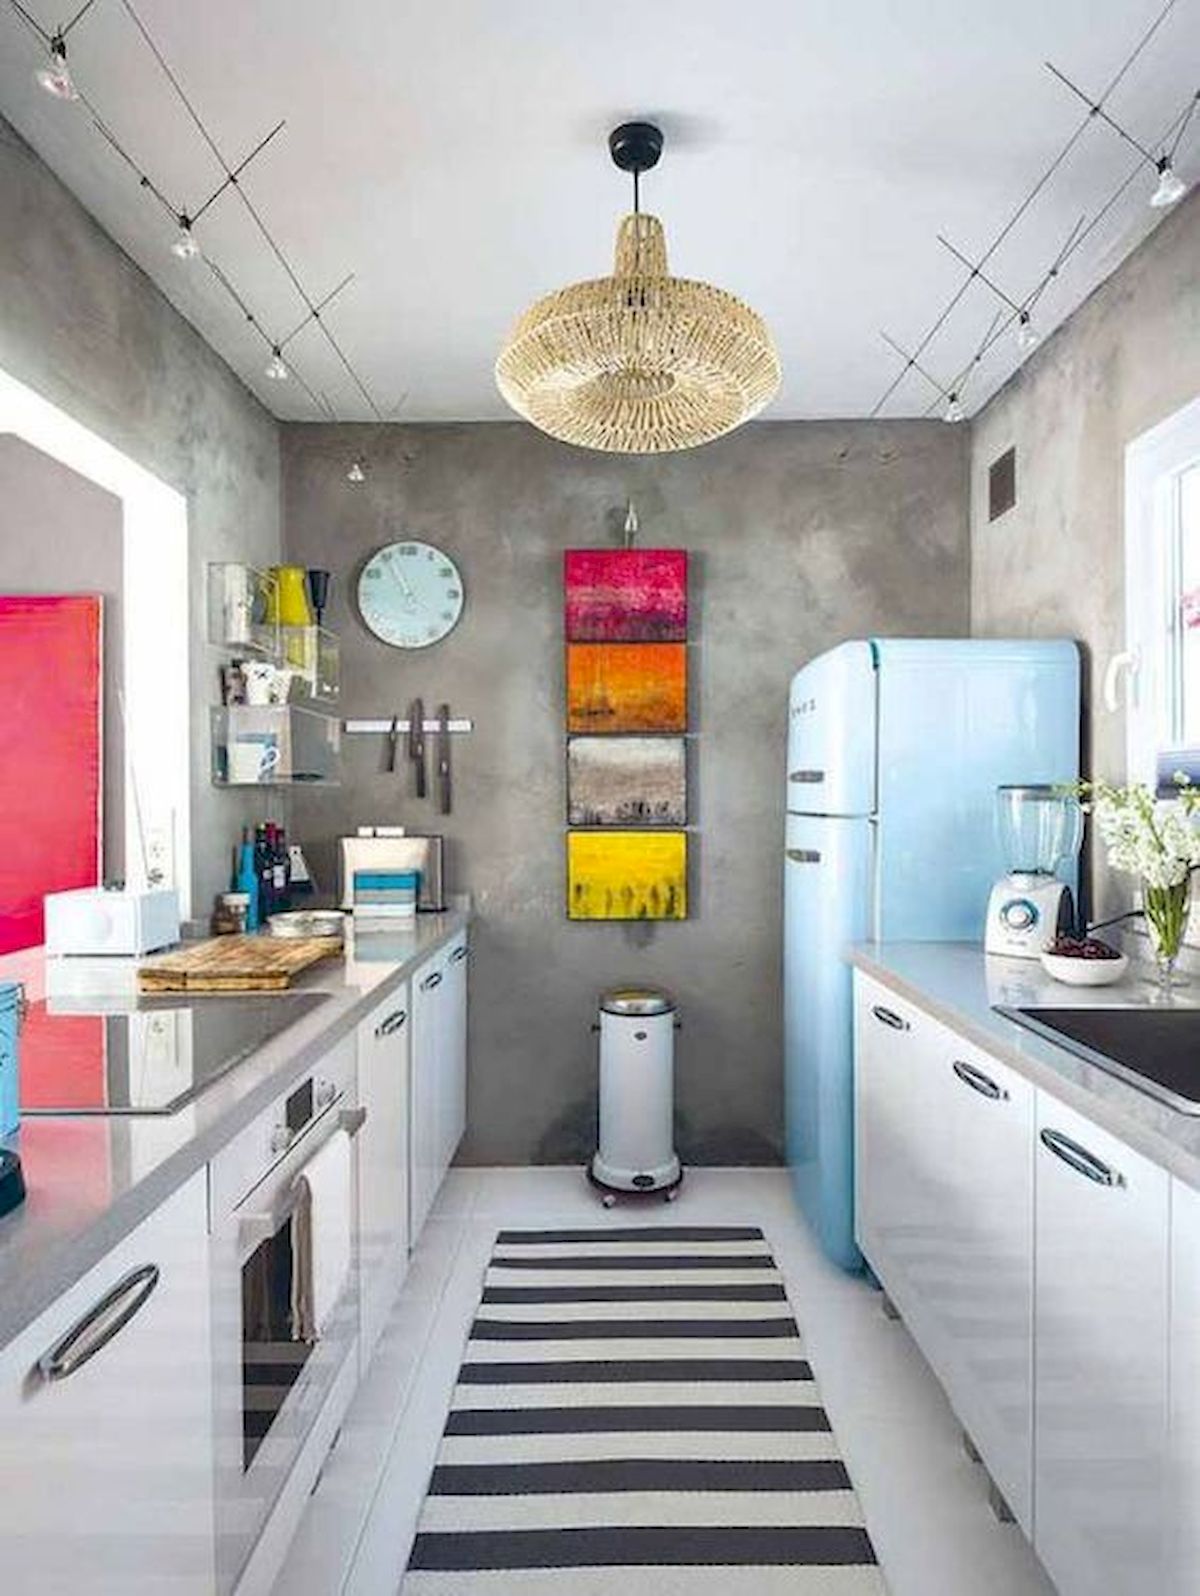 90 Amazing Kitchen Remodel And Decor Ideas With Colorful Design (3)